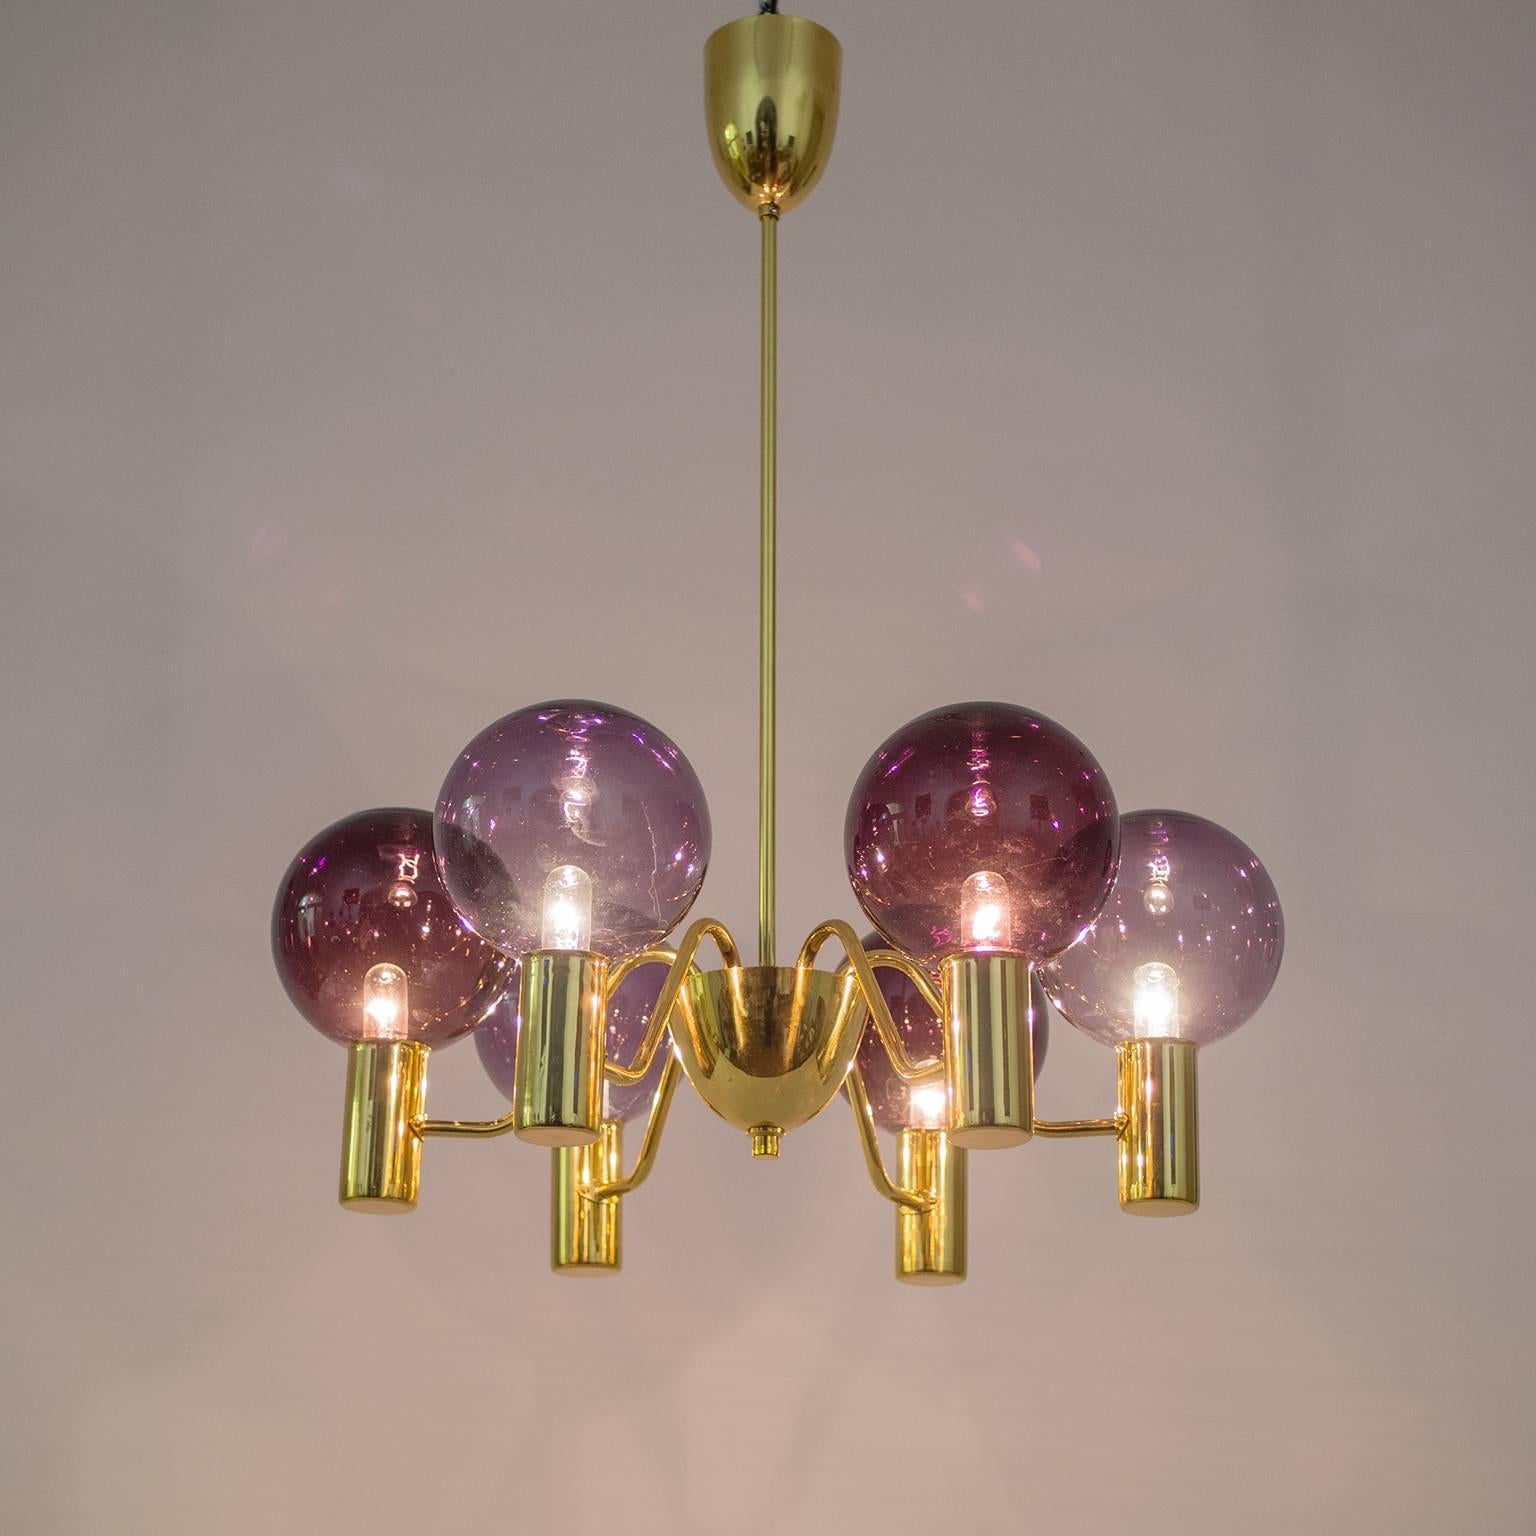 Lovely model T 372/6 chandelier by Hans-Agne Jakobsson from the 1960s. This is a particular rare version with glass globes in two colors—one a deep Bordeaux and the other in a light purple. The chandelier is wired with two circuits allowing the two